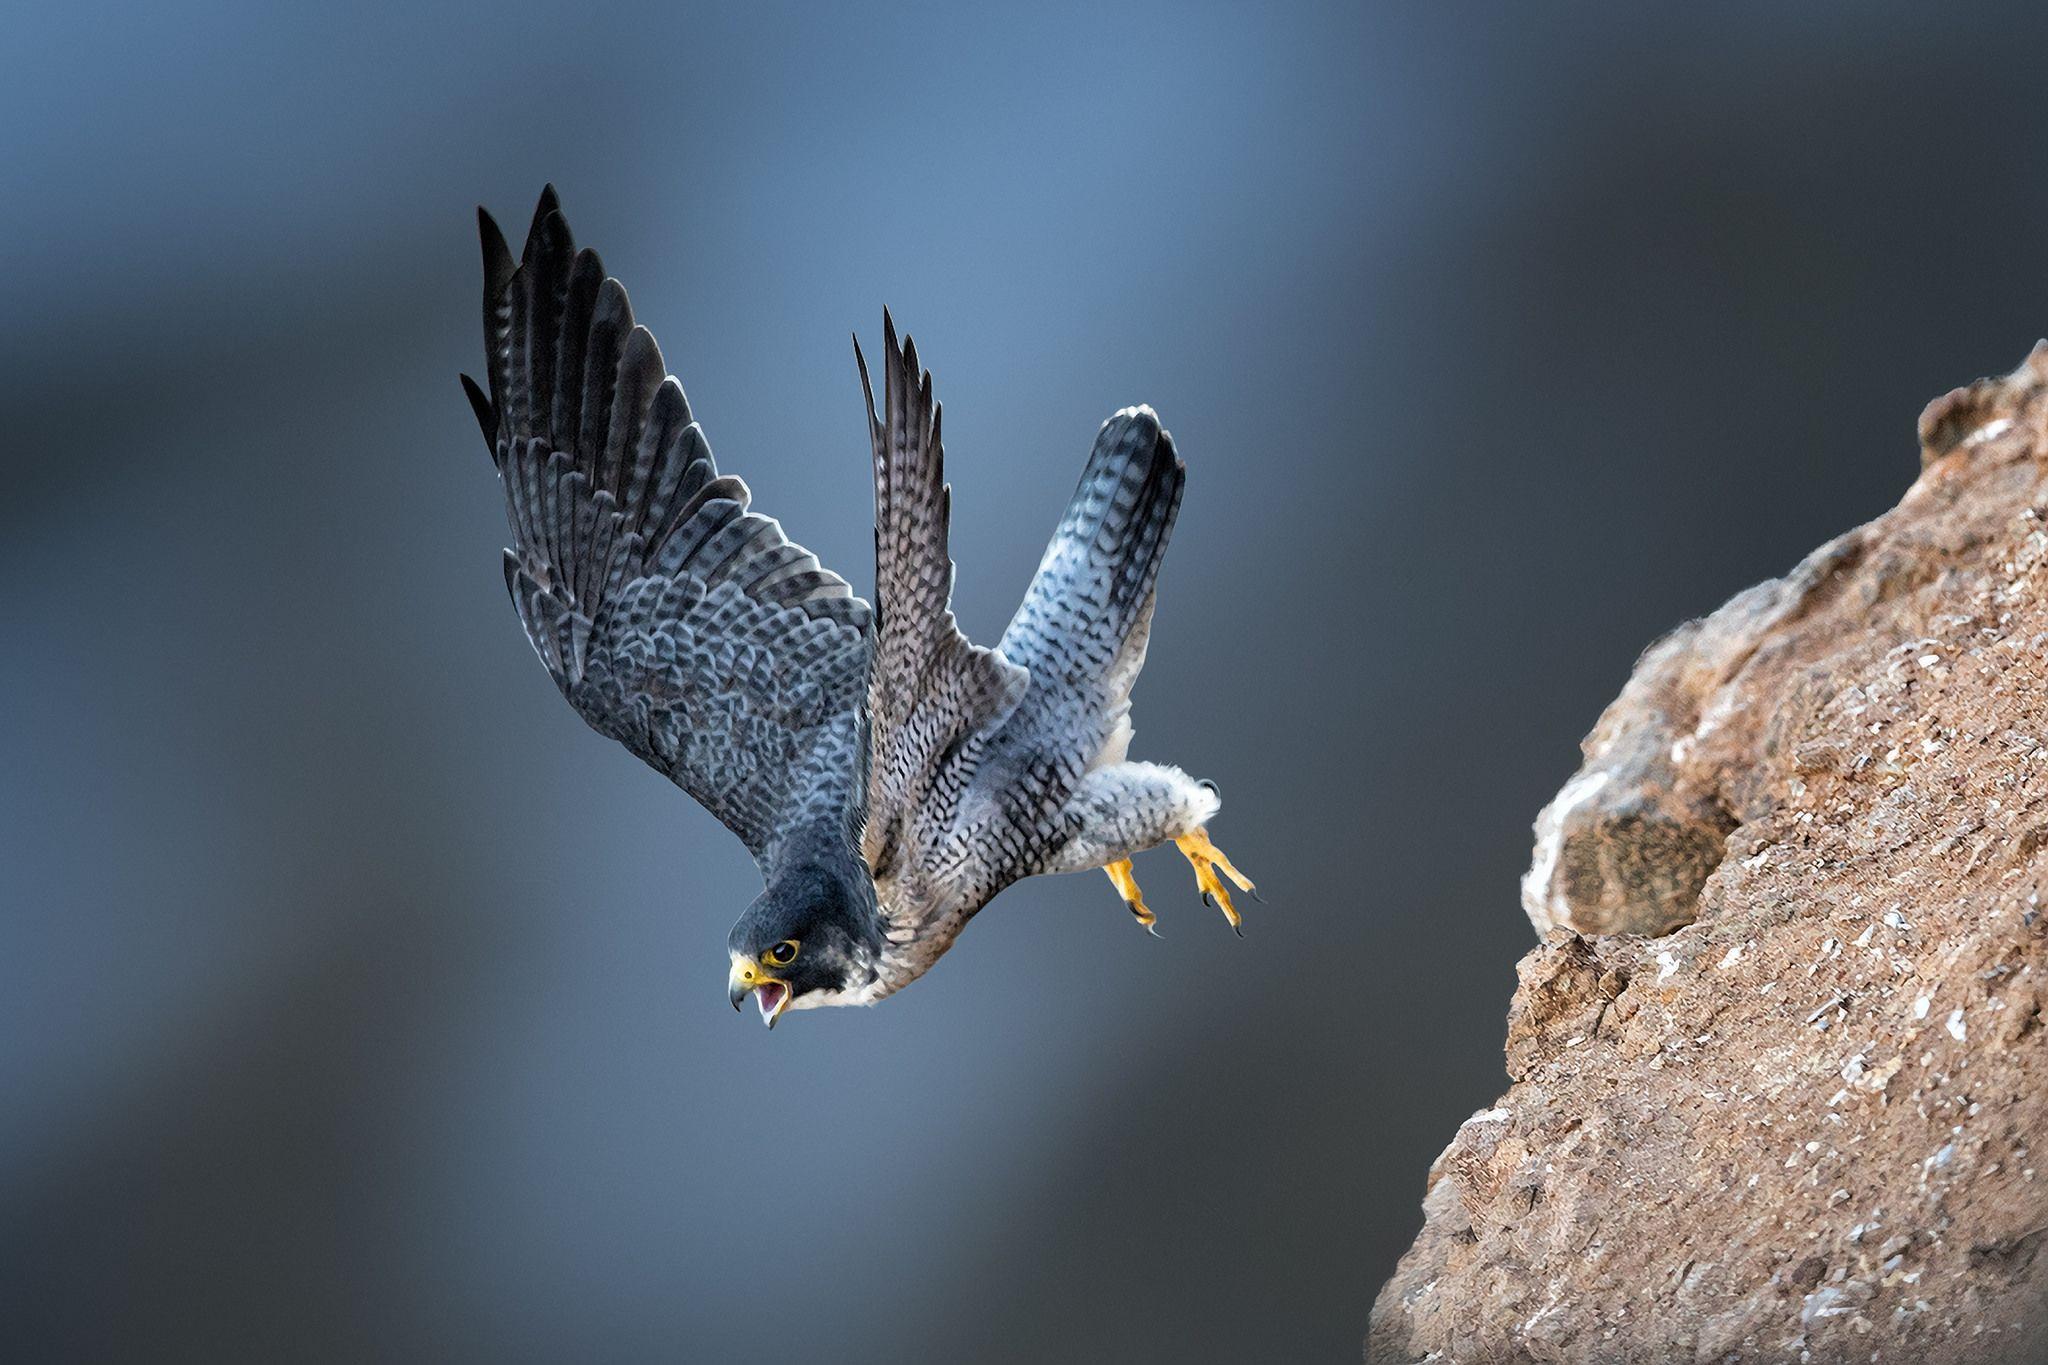 Fast Flying Speed Of Peregrine Falcon [1920x1080]